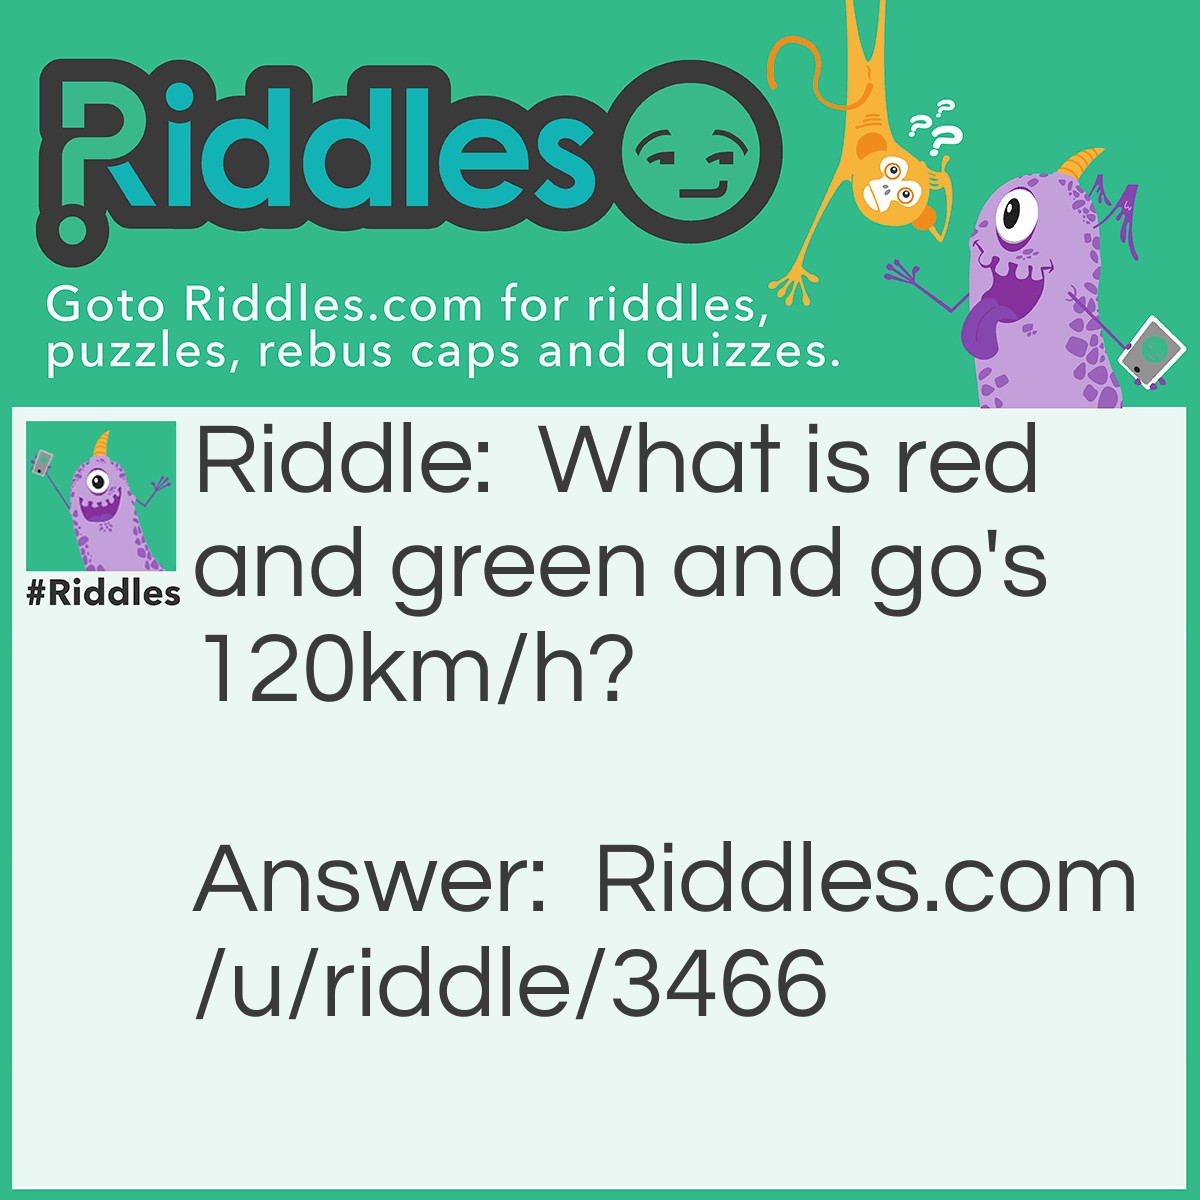 Riddle: What is red and green and go's 120km/h? Answer: A frog in a blender.